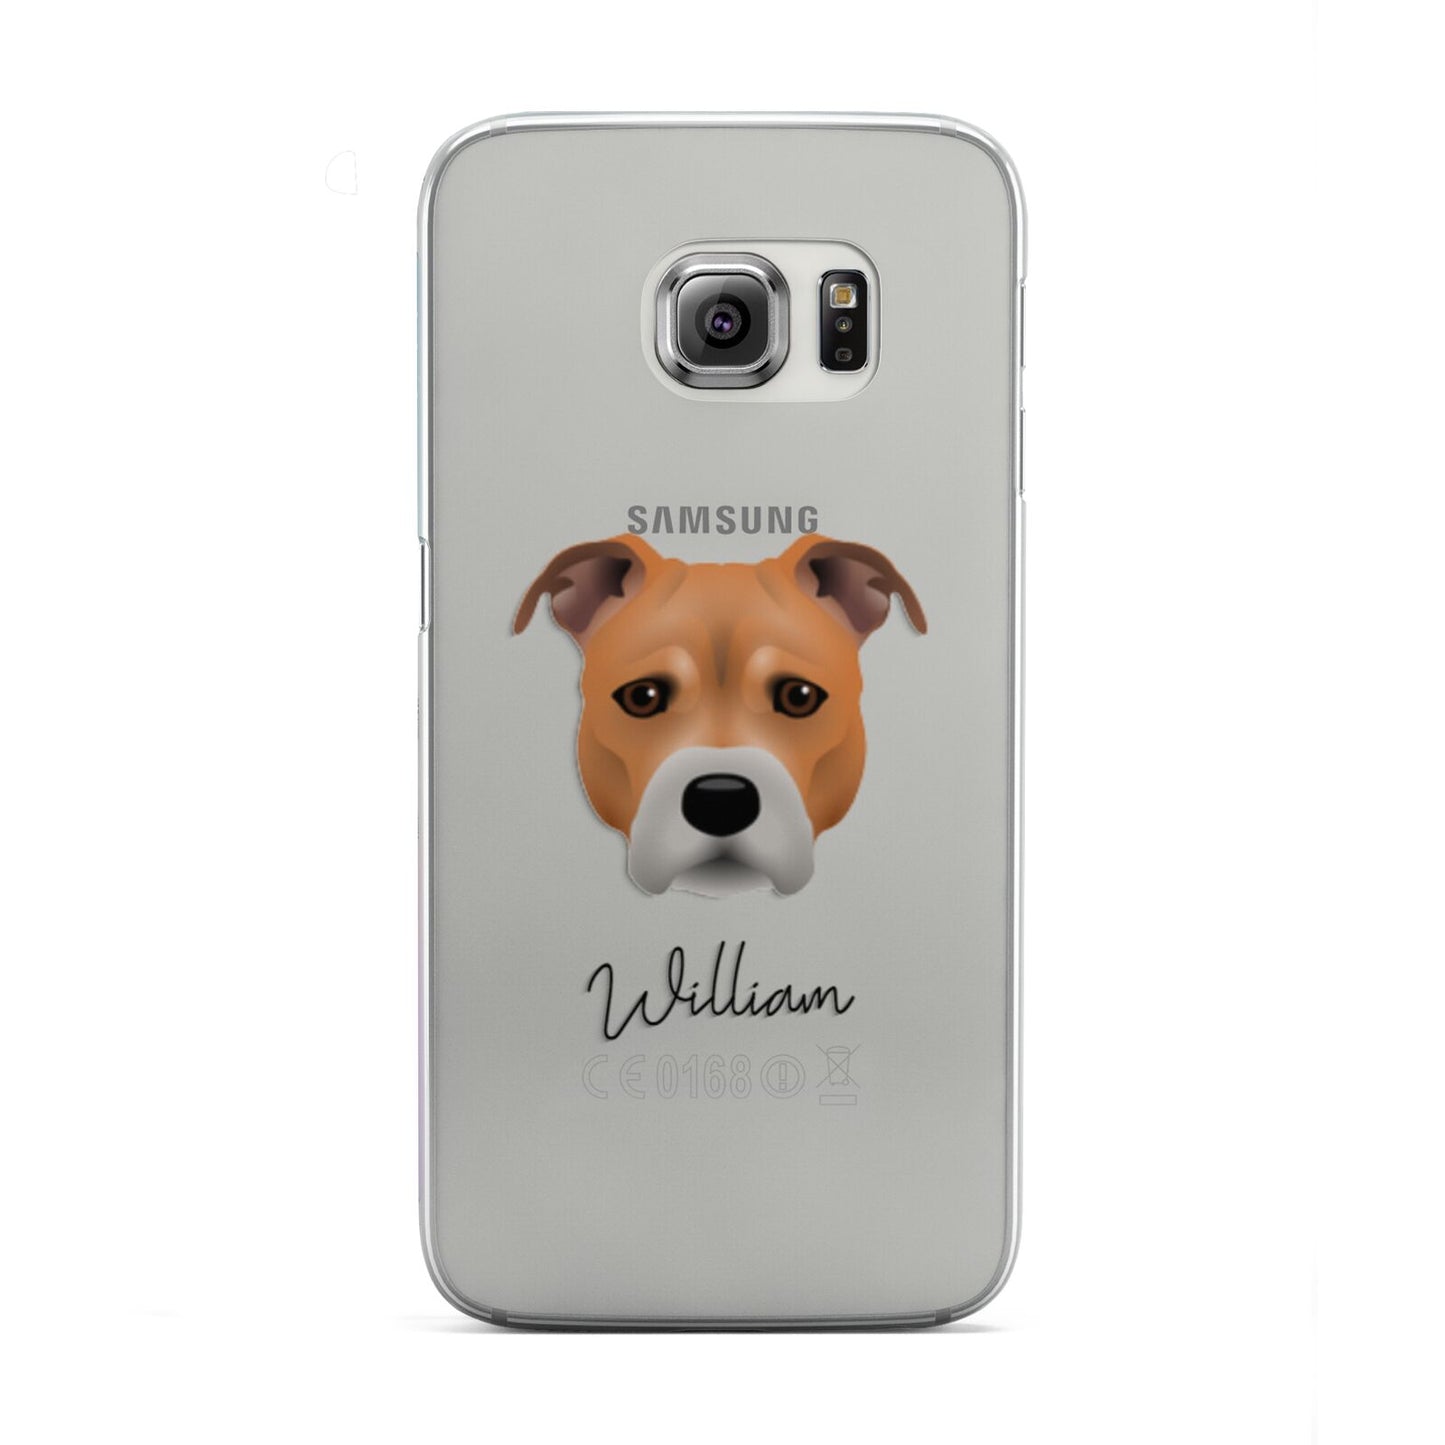 Staffordshire Bull Terrier Personalised Samsung Galaxy S6 Edge Case